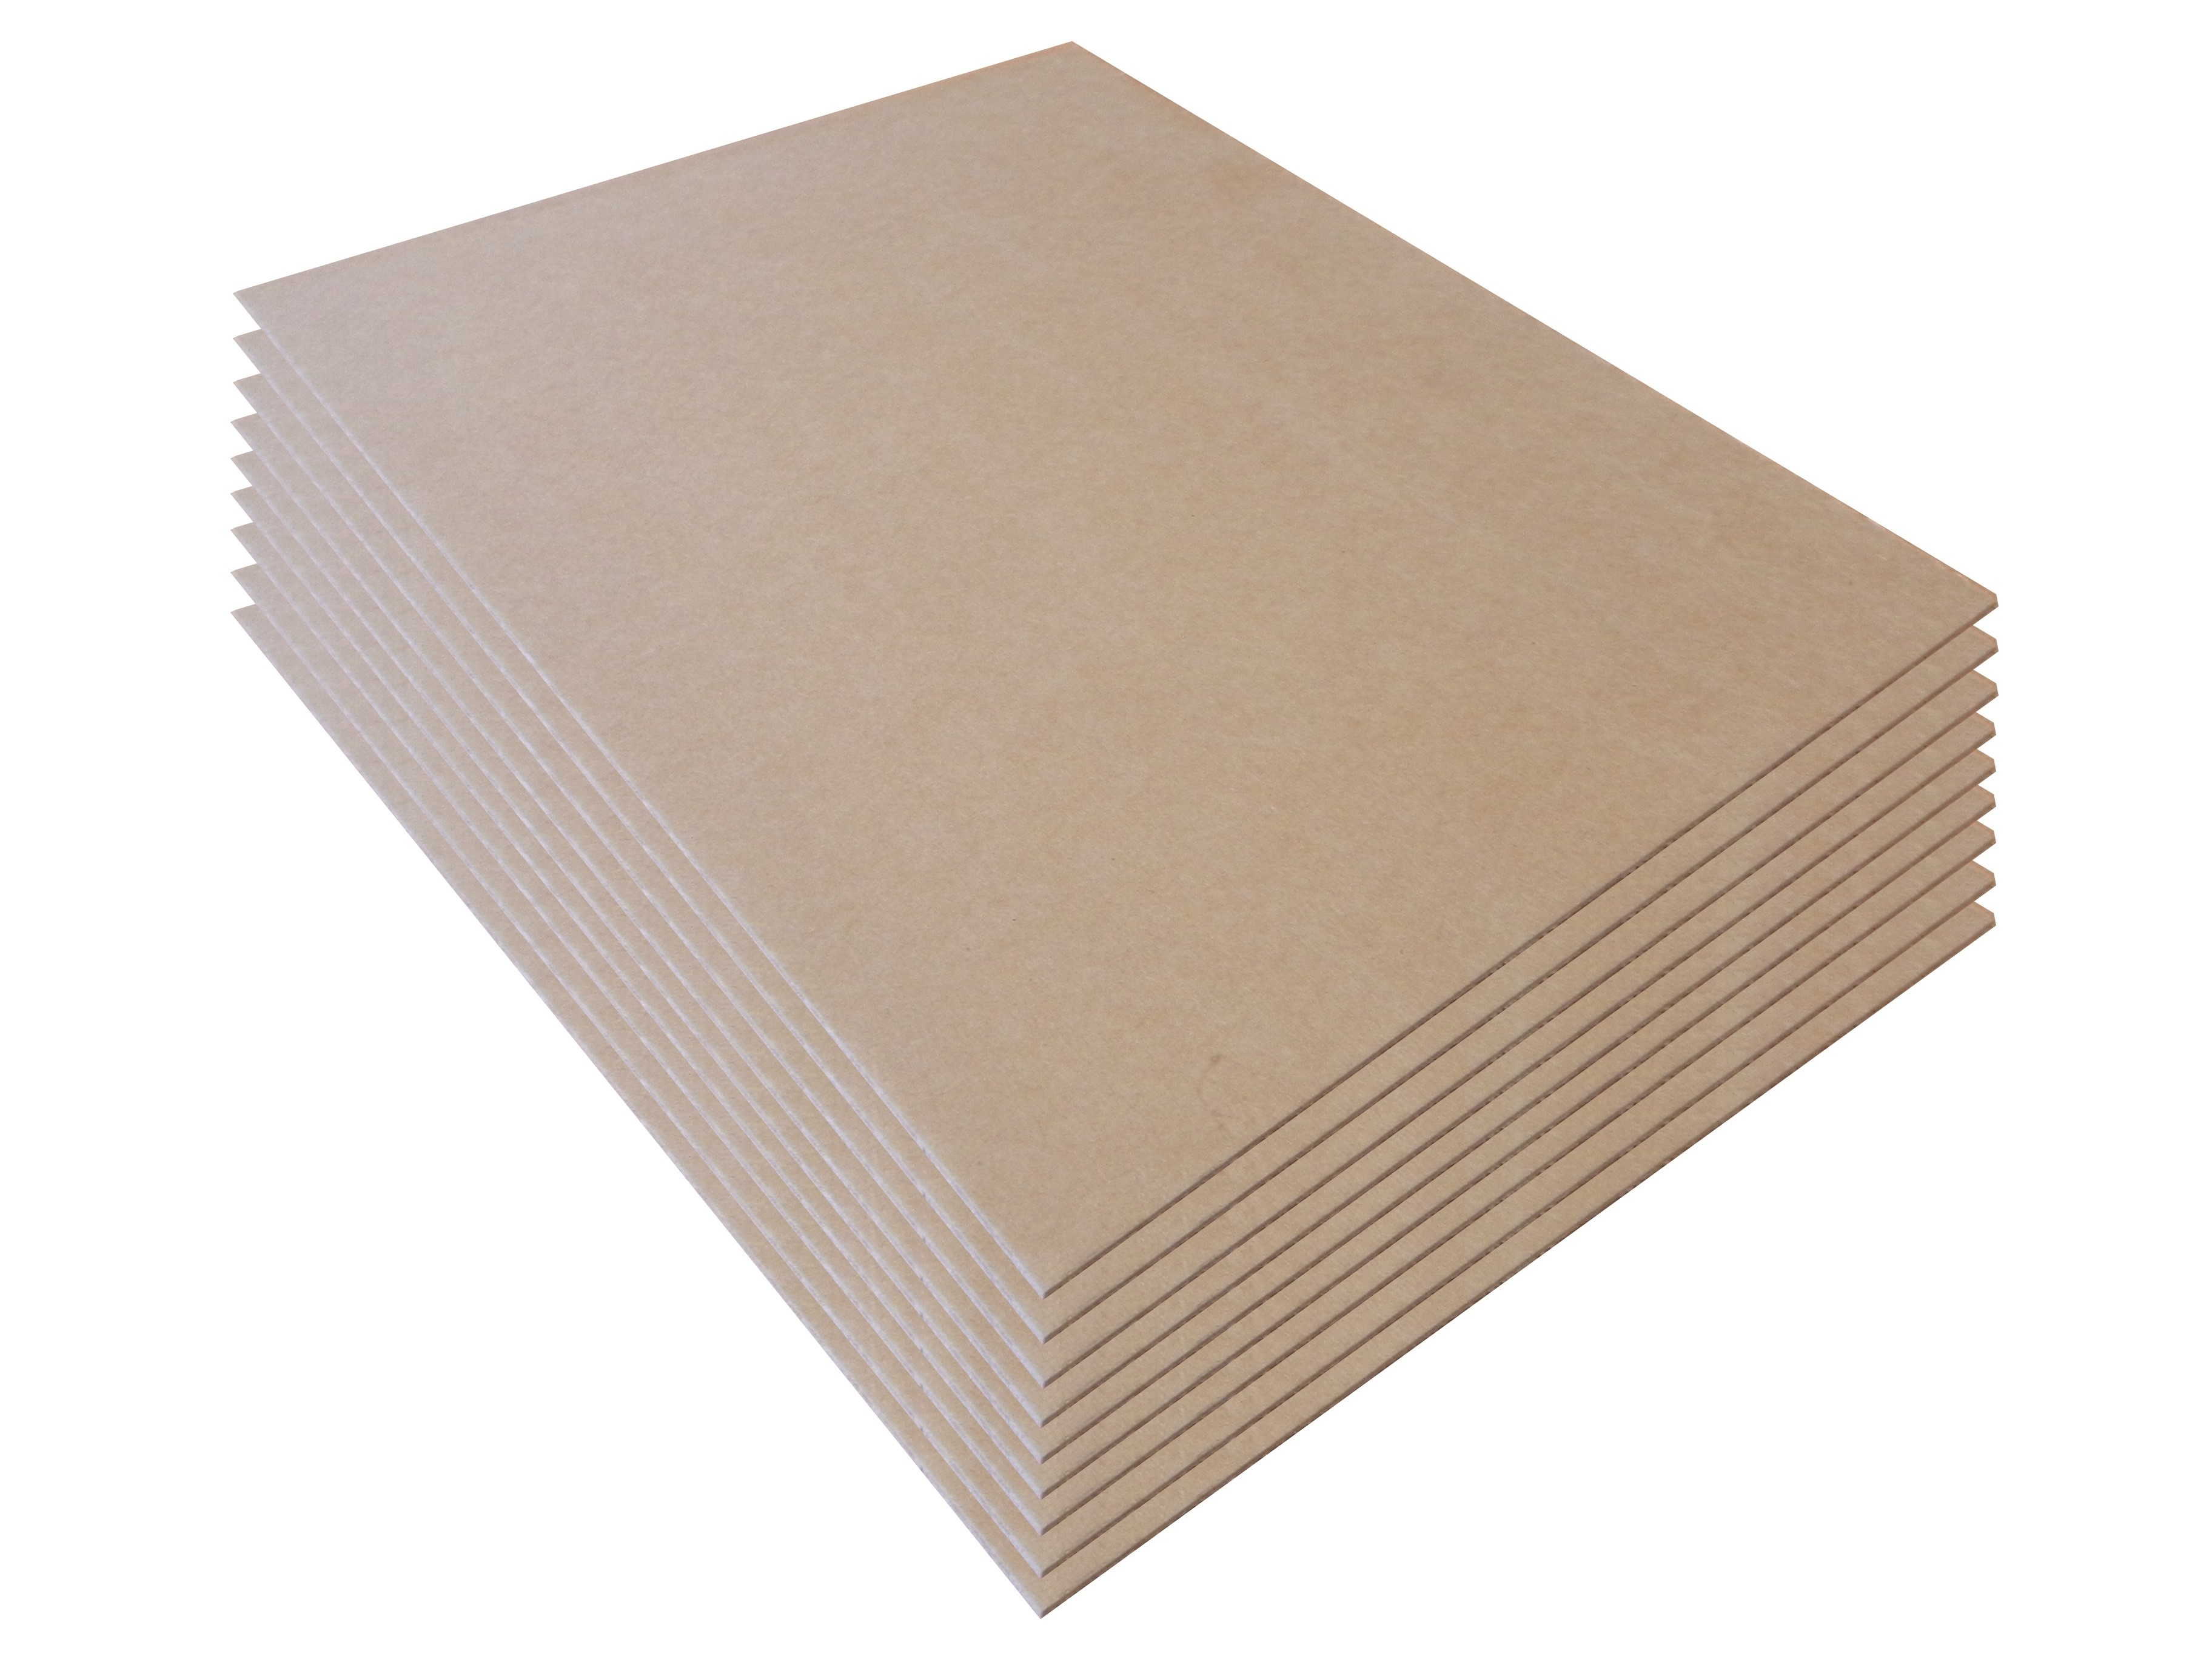 Backing Board 400 x 400mm - 10 pack